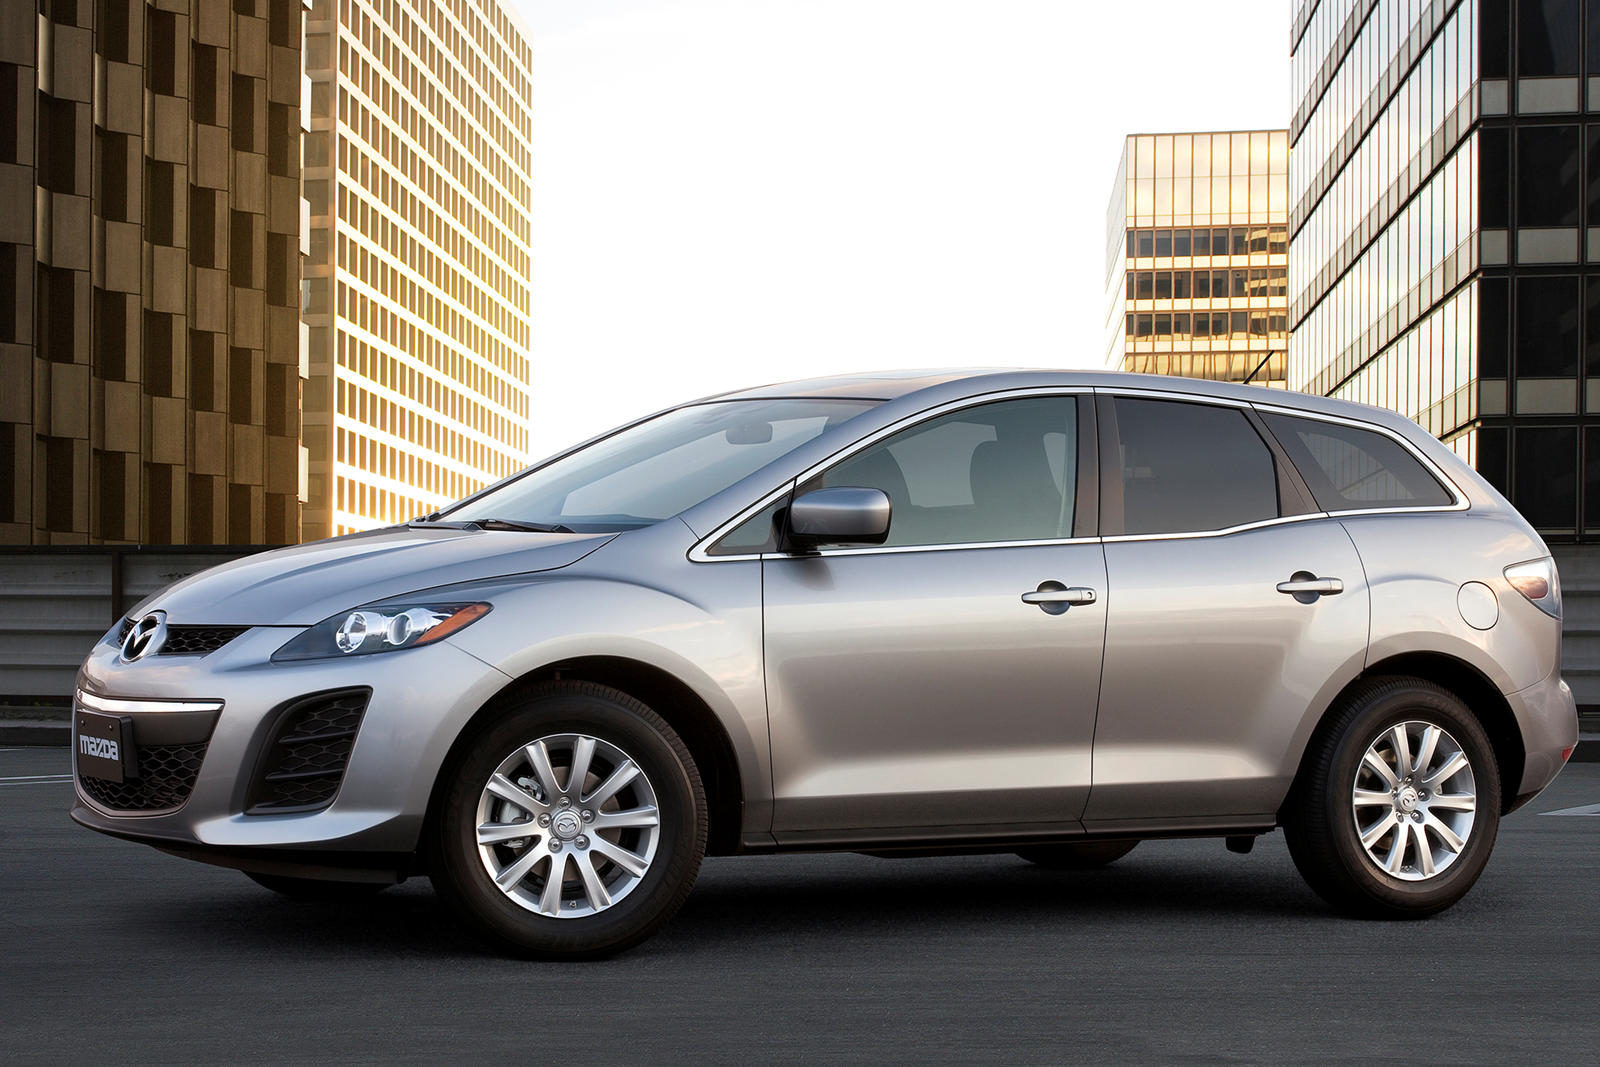 Used Mazda CX-7 With Remote Engine Start For Sale Near Me: Check Prices And Deals | CarBuzz